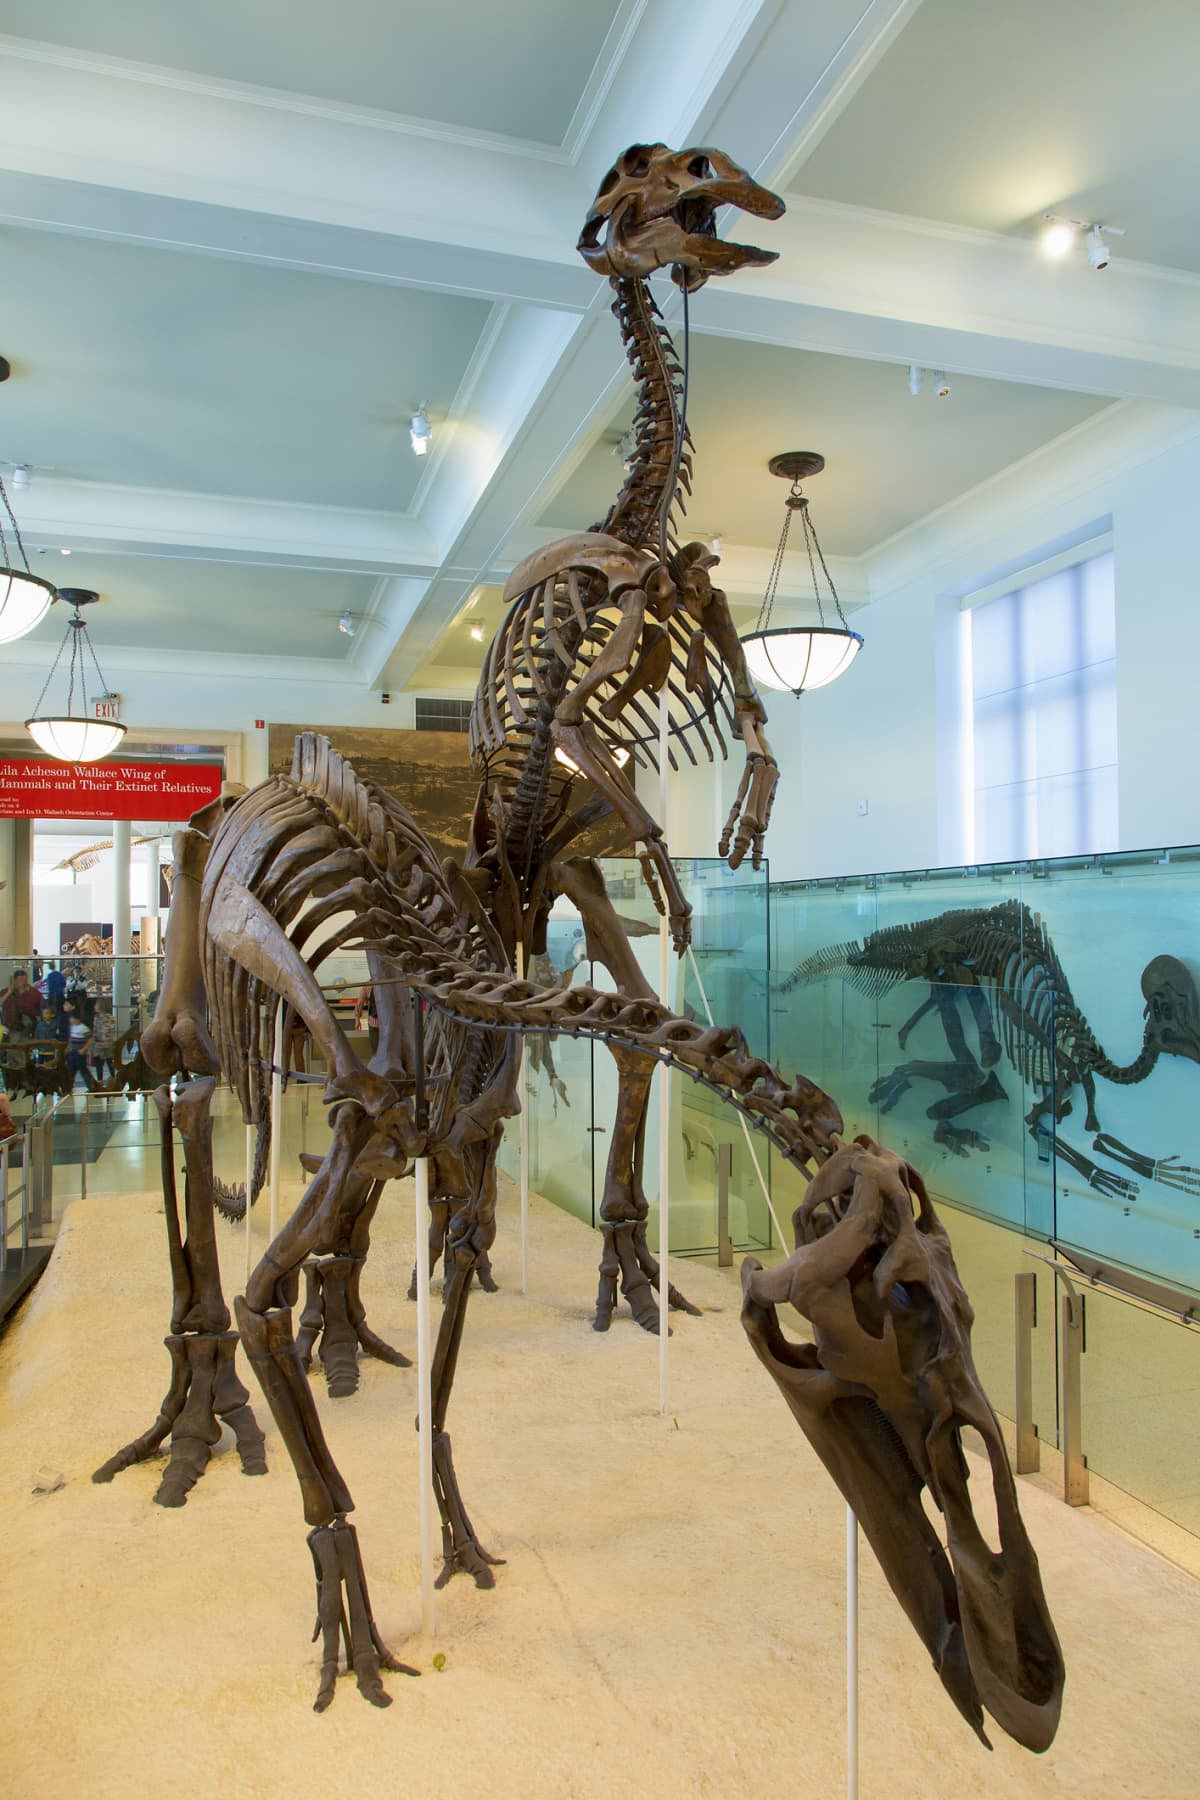 Dinosaur bones on display at the American Museum of Natural History in New York City